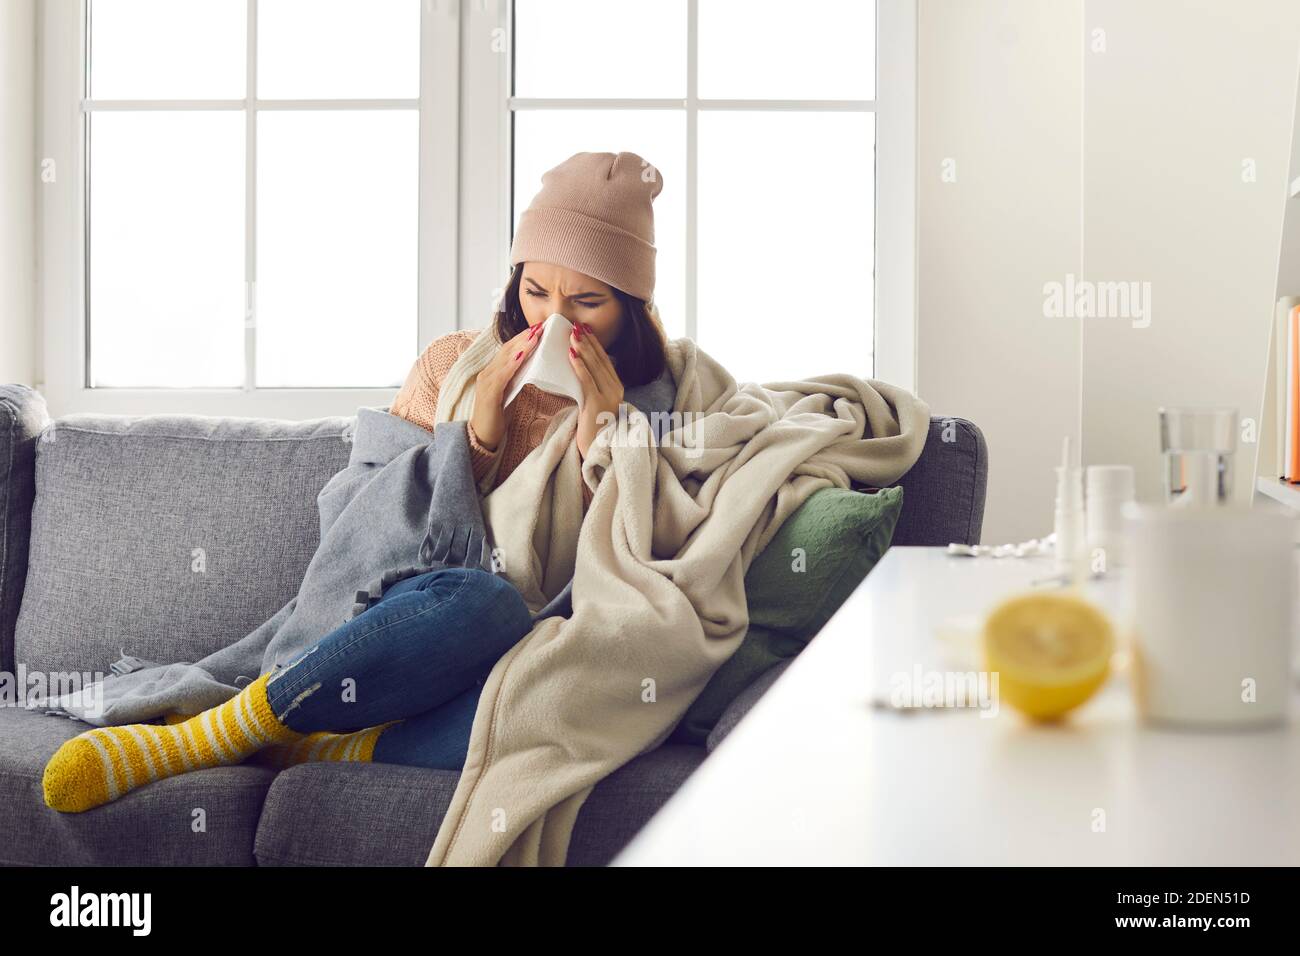 Young woman in warm clothing, socks and hat sitting on sofa, blowing nose and feeling ill Stock Photo